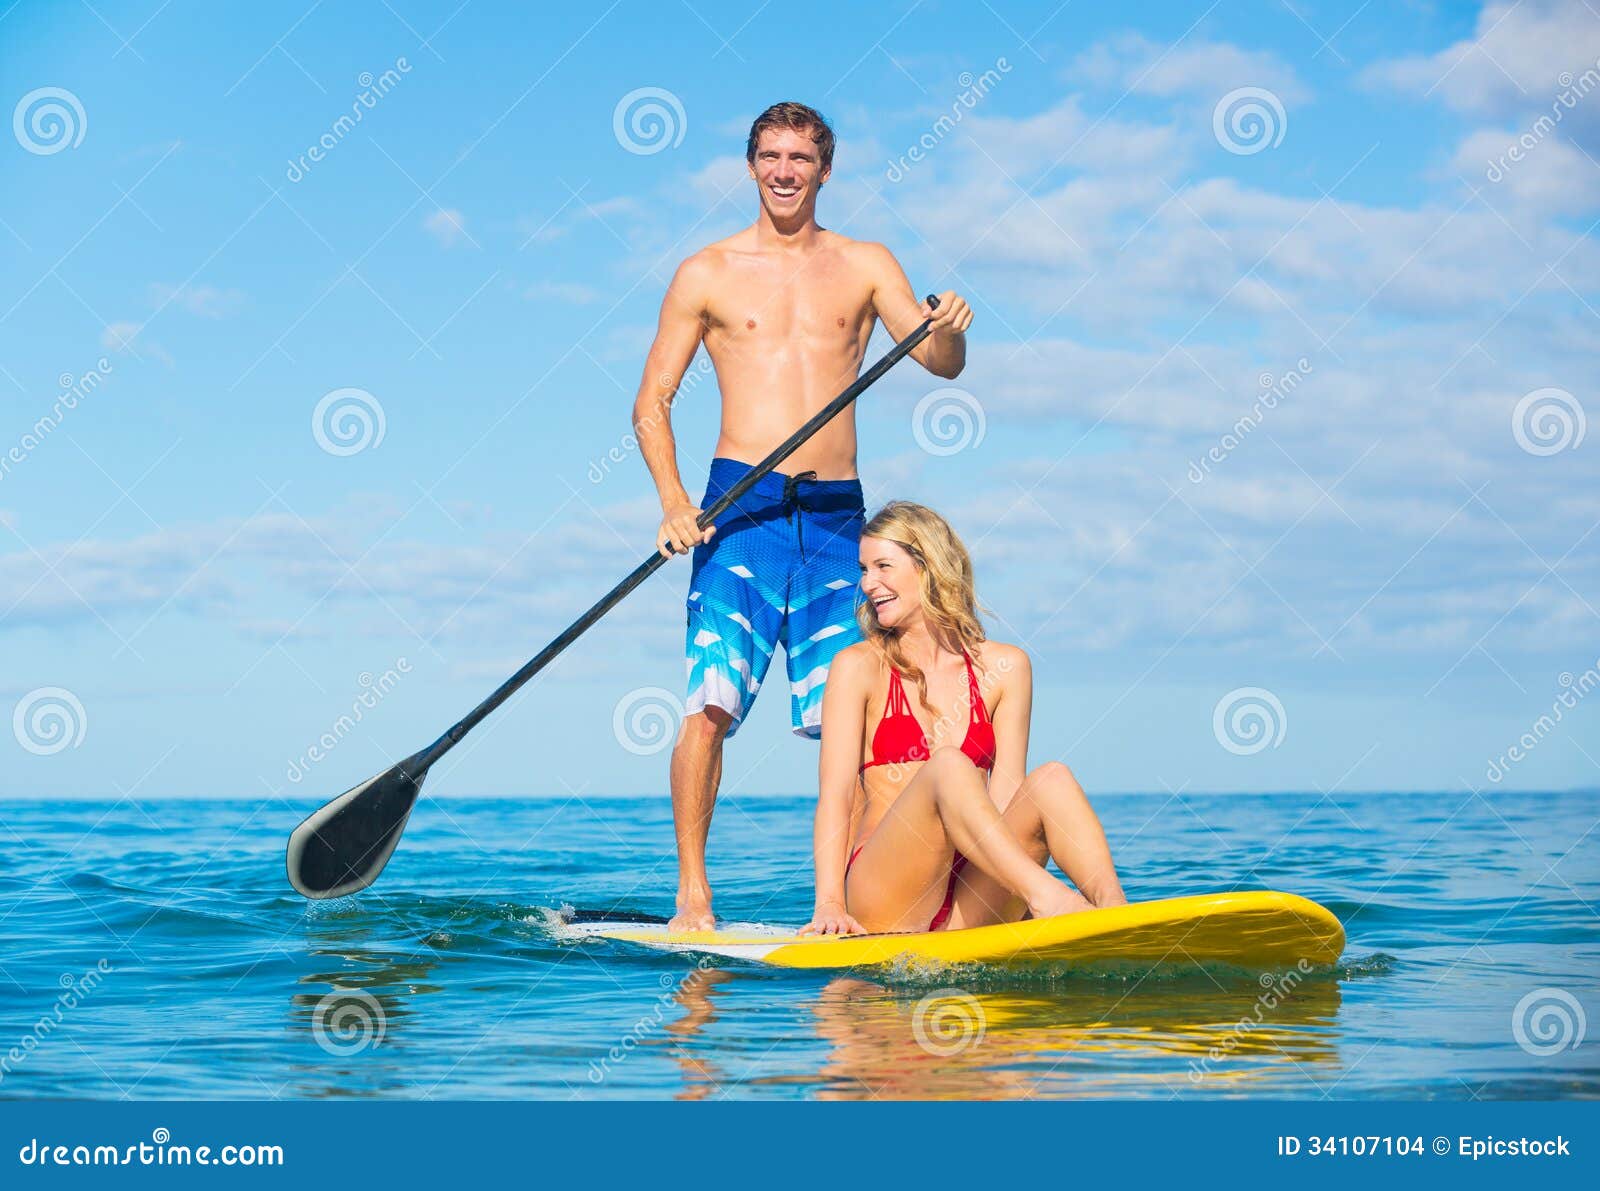 couple stand up paddle surfing in hawaii